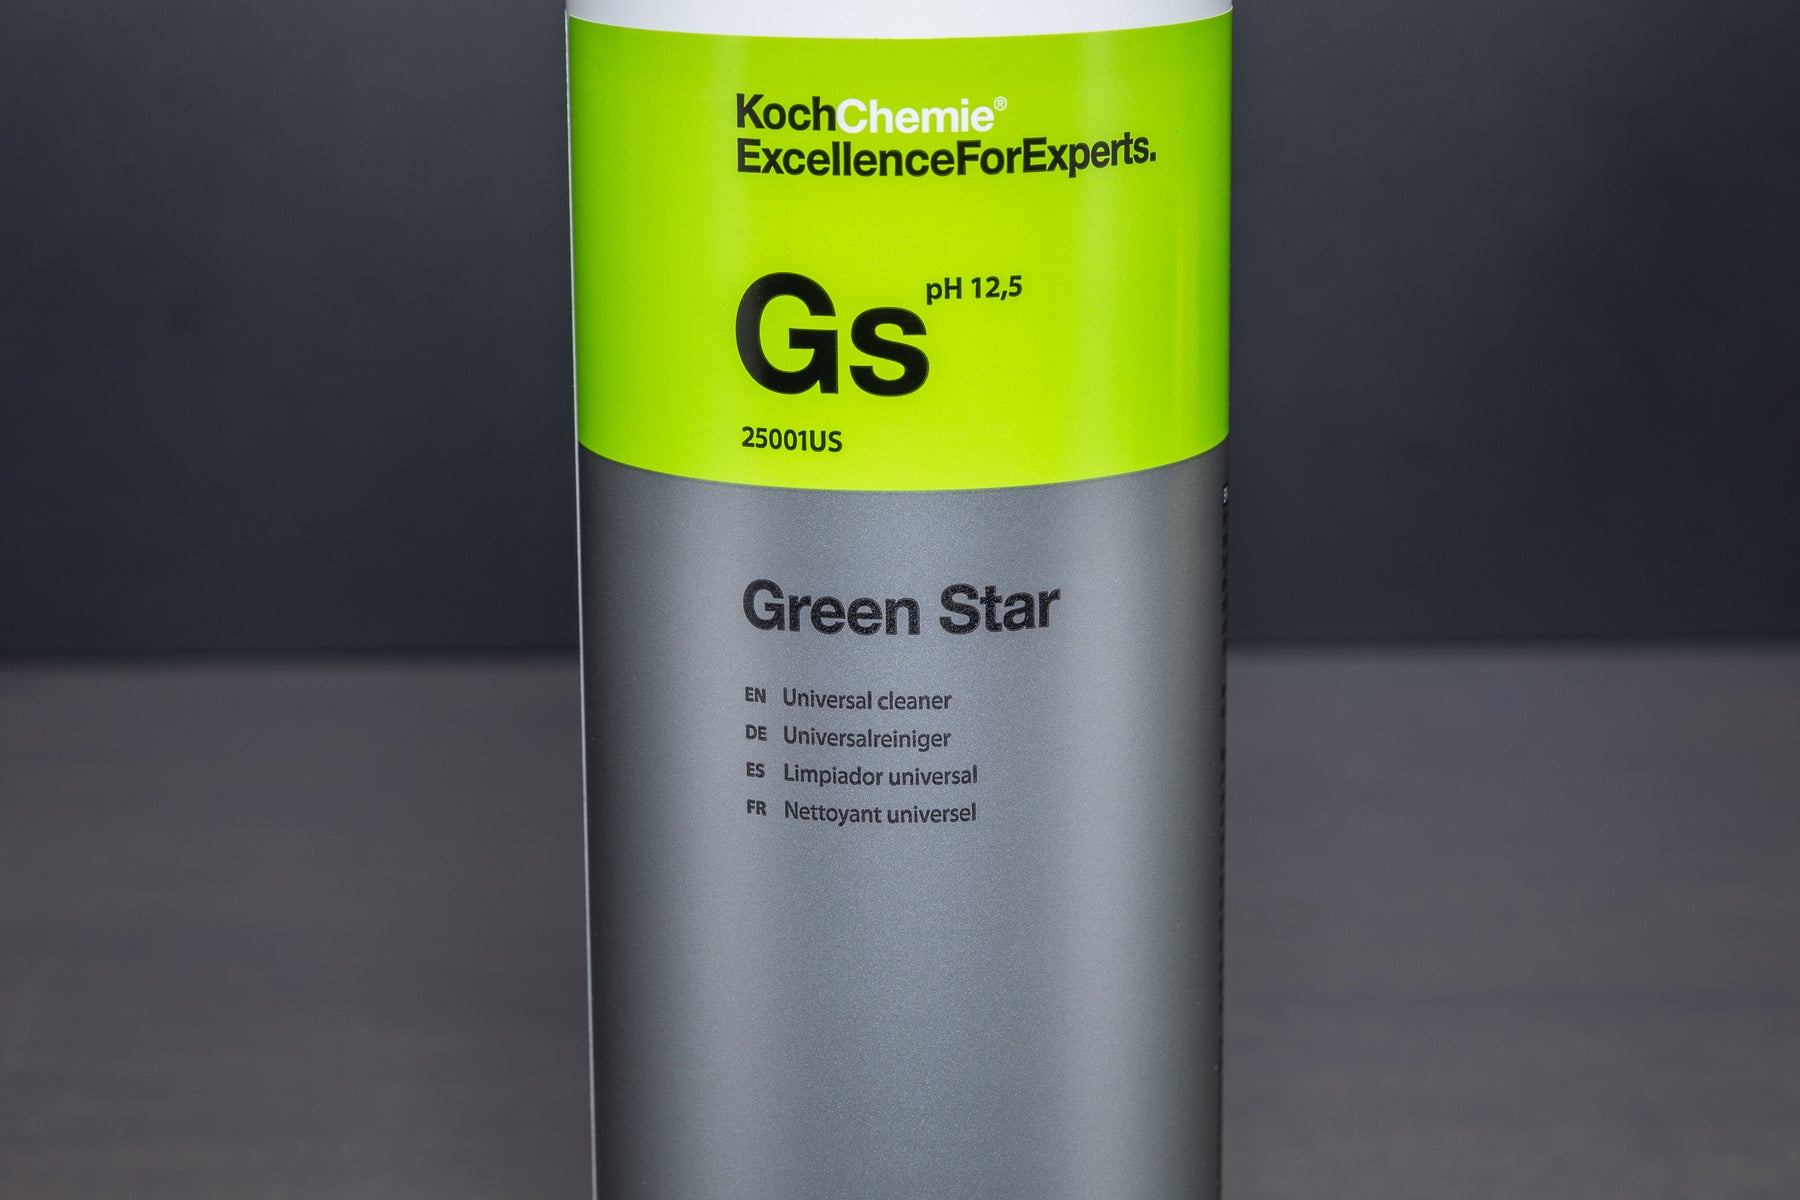  Koch-Chemie Green Star Highly Concentrated Phosphate-Free  Solvent-Free Universal Cleaner for Auto, Machinery, Commercial, Industrial  Use : Automotive